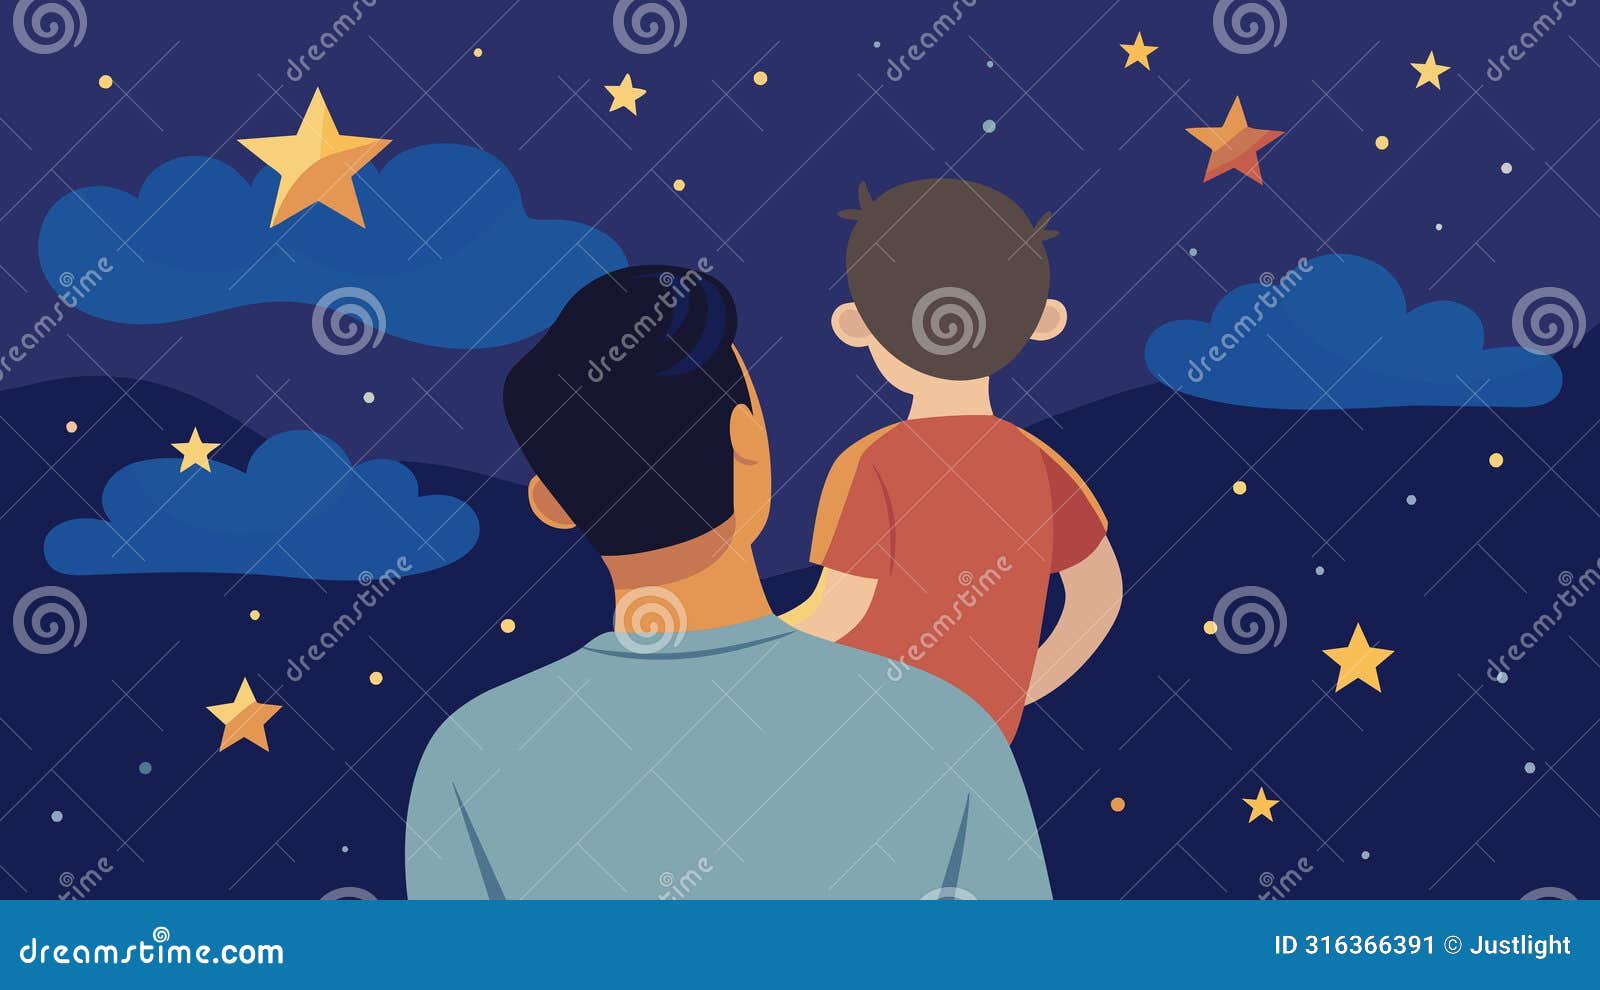 with the childs head resting on their fathers shoulder the two watched the stars emerge in the night sky a perfect